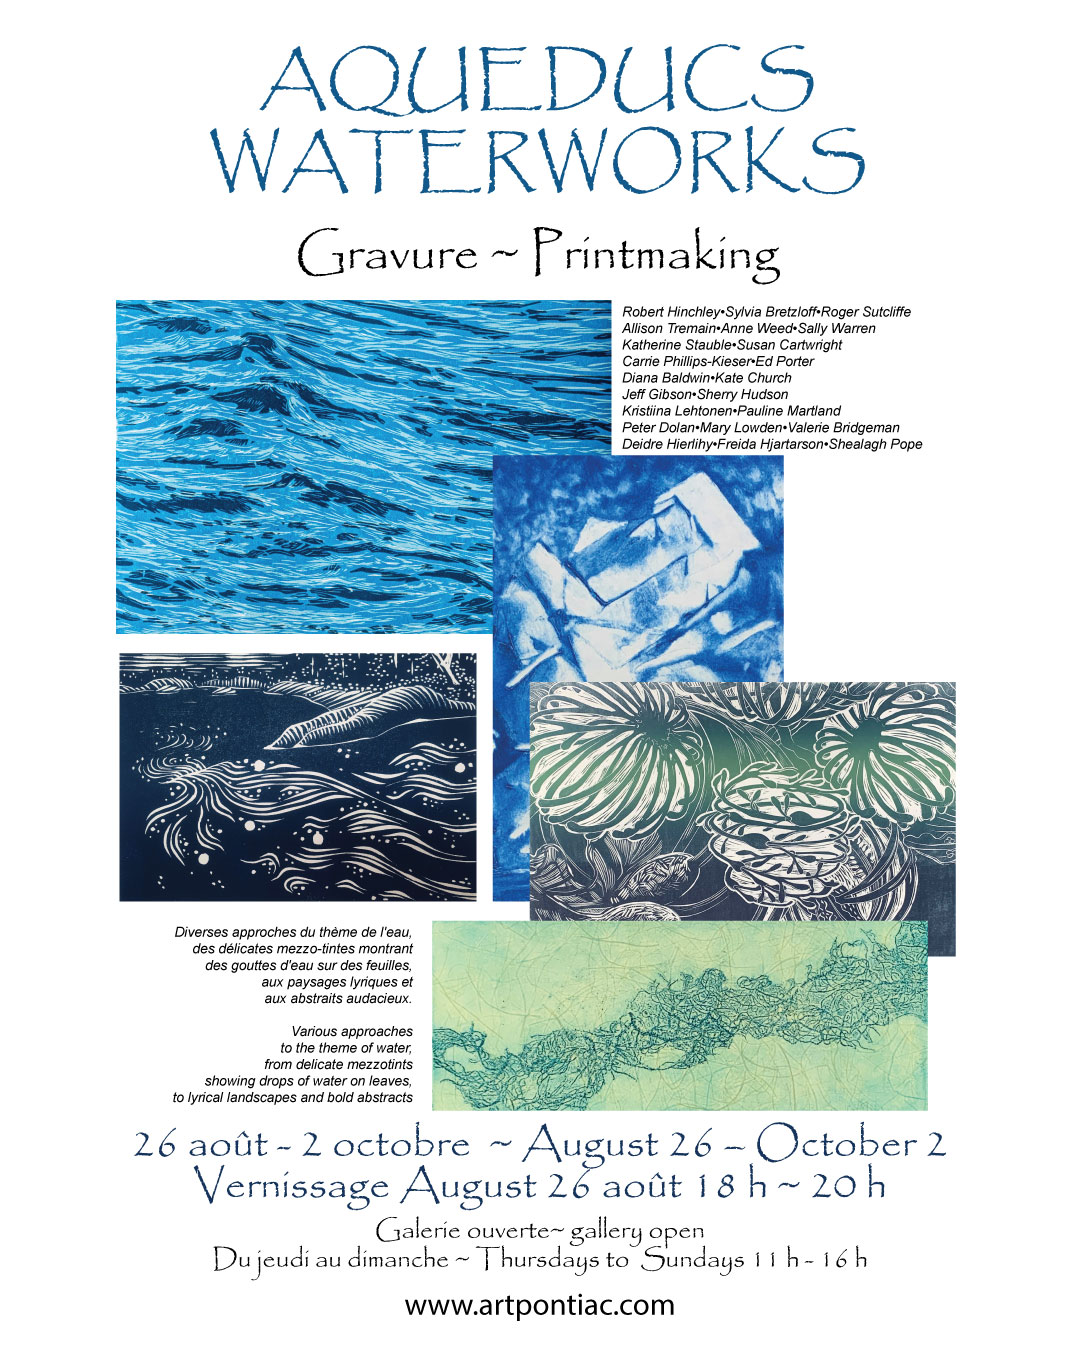 Waterworks – Opening Night Friday 26 August!